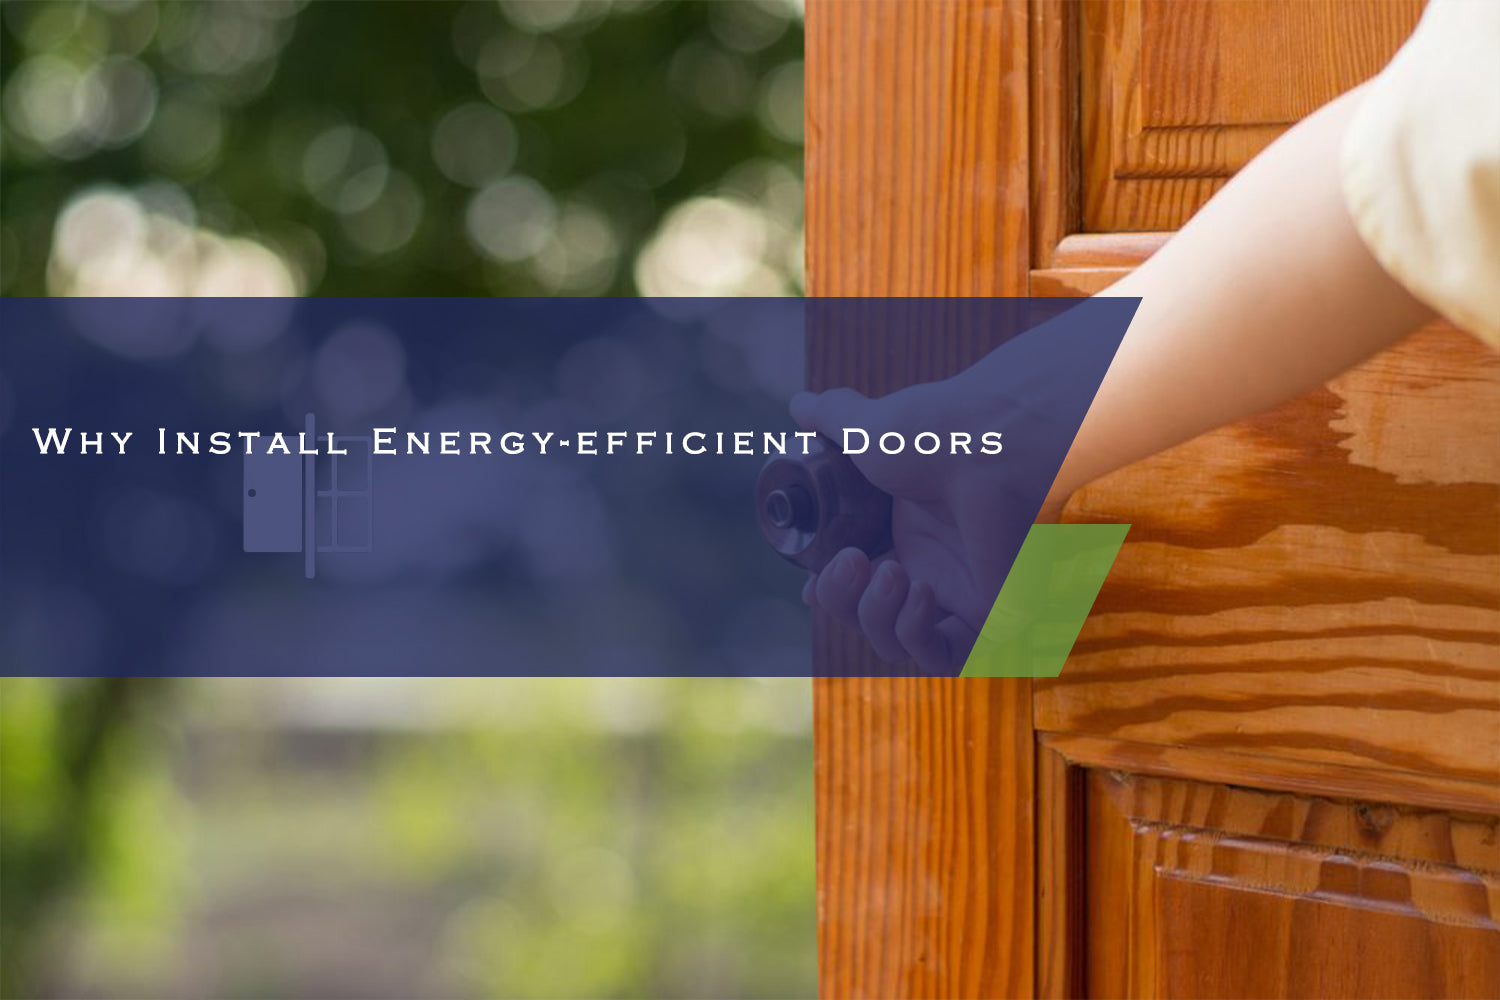 Why Install Energy-efficient Doors?